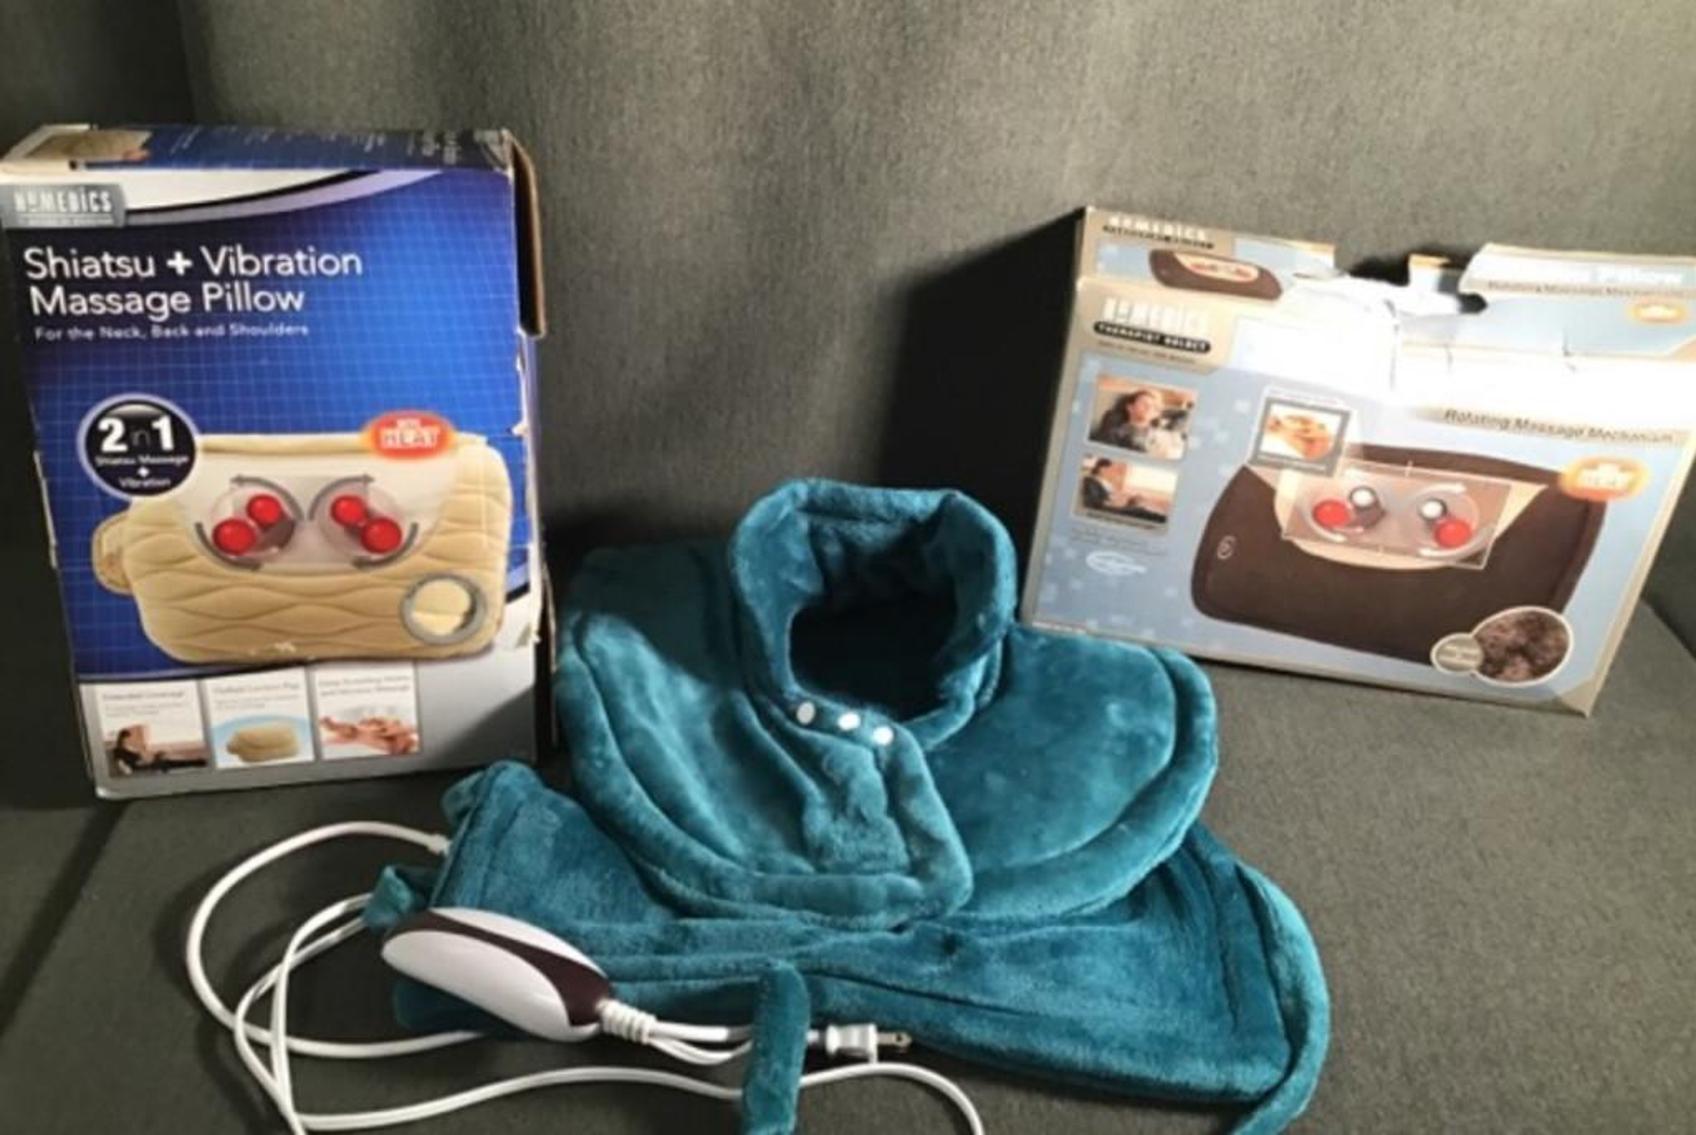 Image for Blood Pressure Machine, Massage Pillows And Neck & Shoulder Heating Pad, And Nebulizer